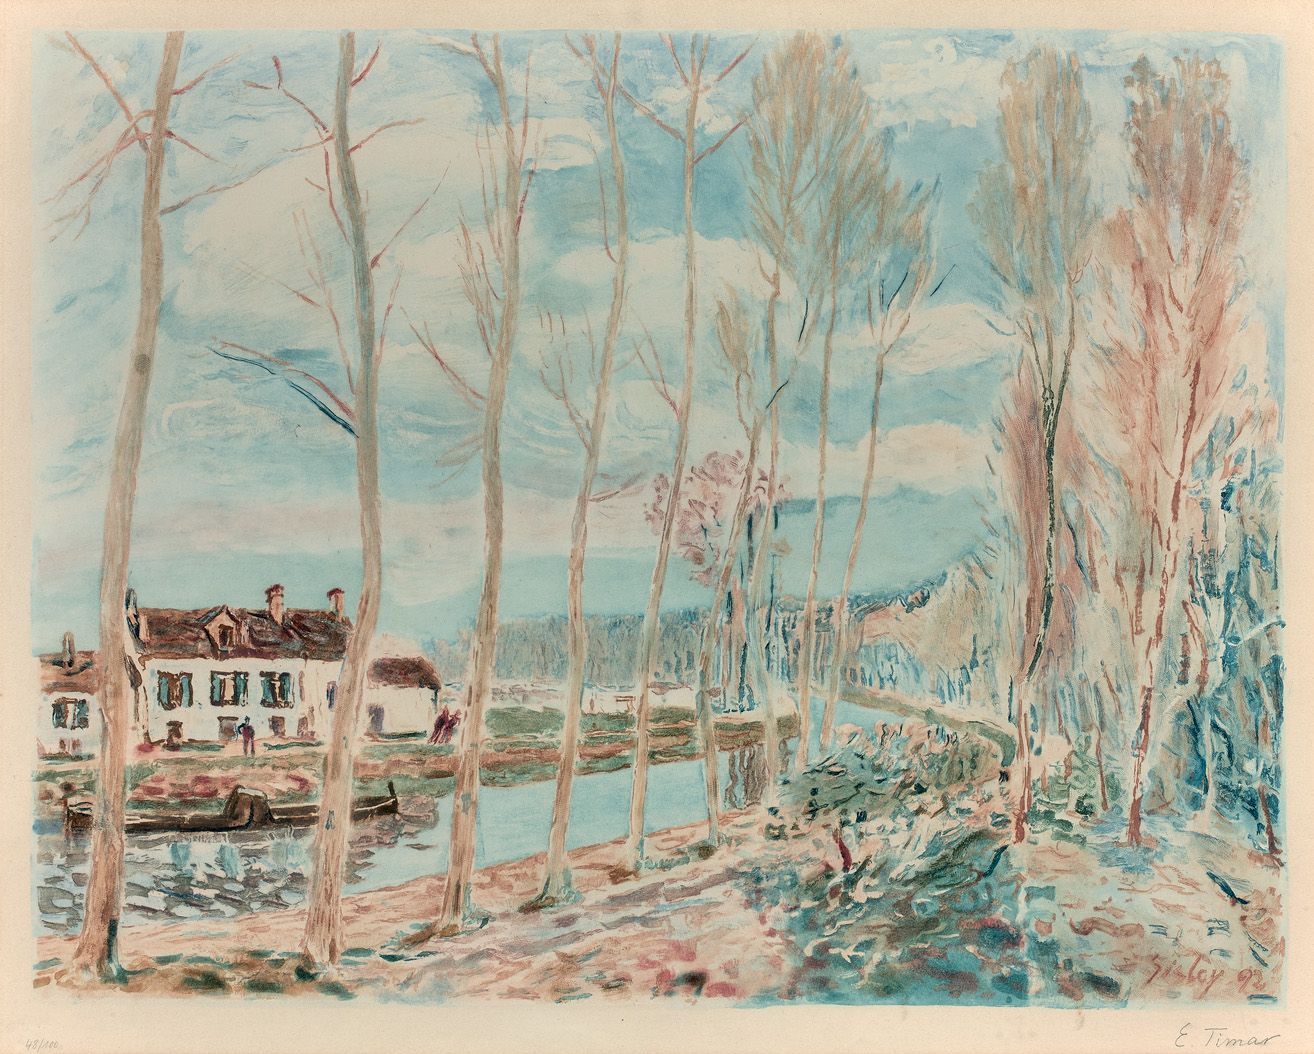 Null Emeric TIMAR (1898-1950), nach Sisley.

Chatou, die Pappelallee

Farblithog&hellip;